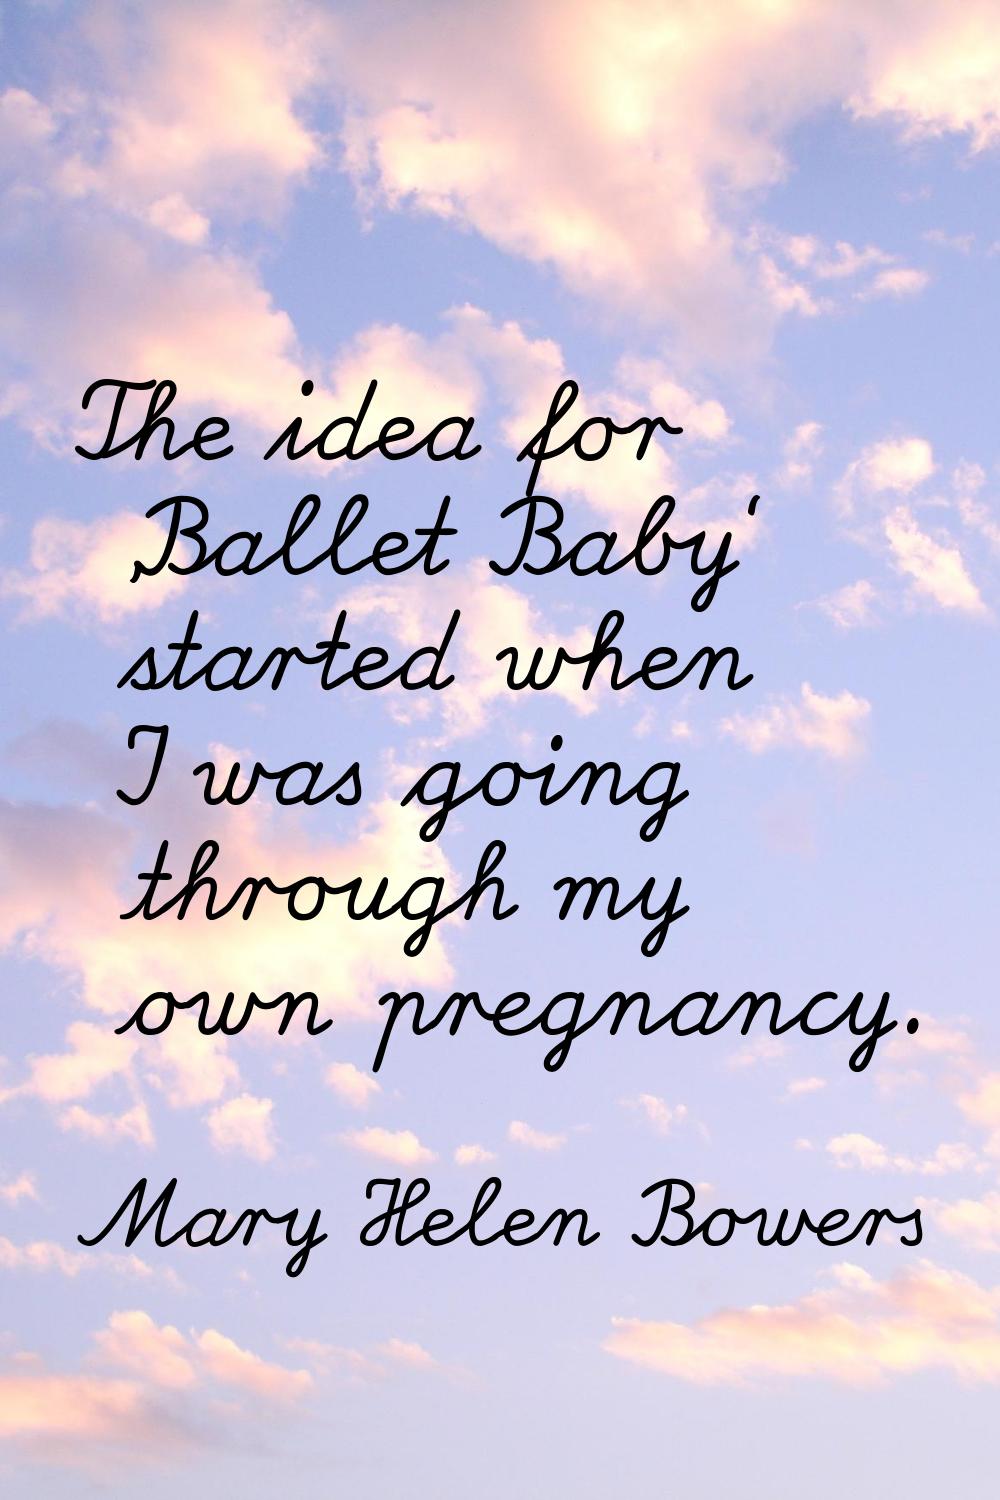 The idea for 'Ballet Baby' started when I was going through my own pregnancy.